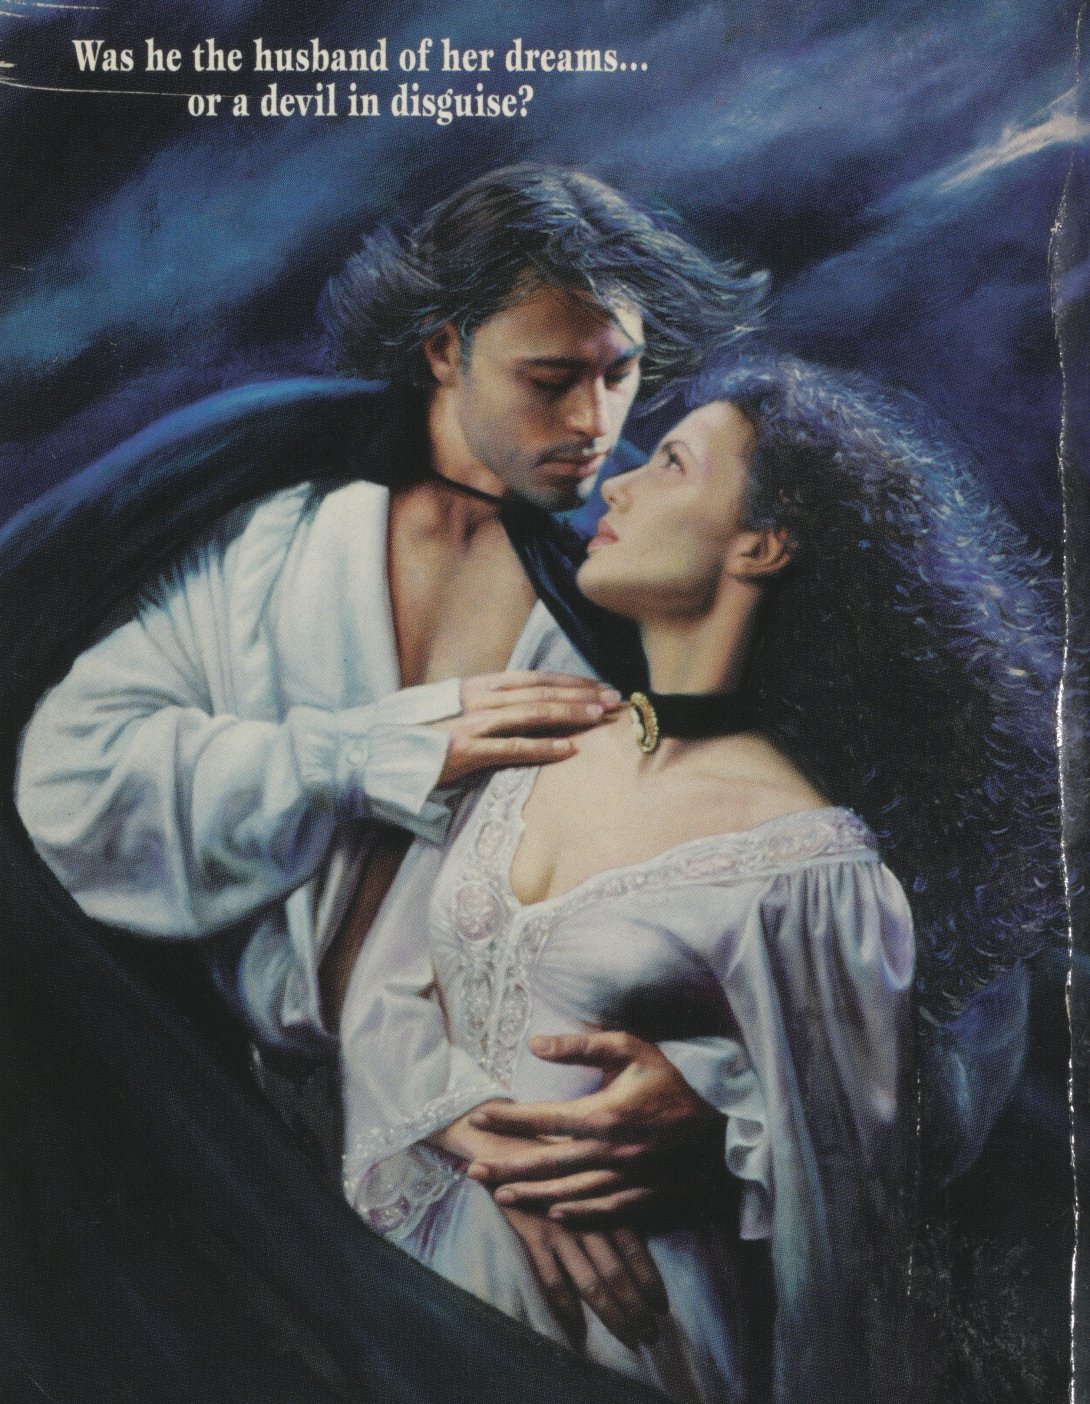 Dramatic image of a man in a white shirt and dark cape with his arm around the waist of a woman in a low-cut blouse as they look into eachothers eyes